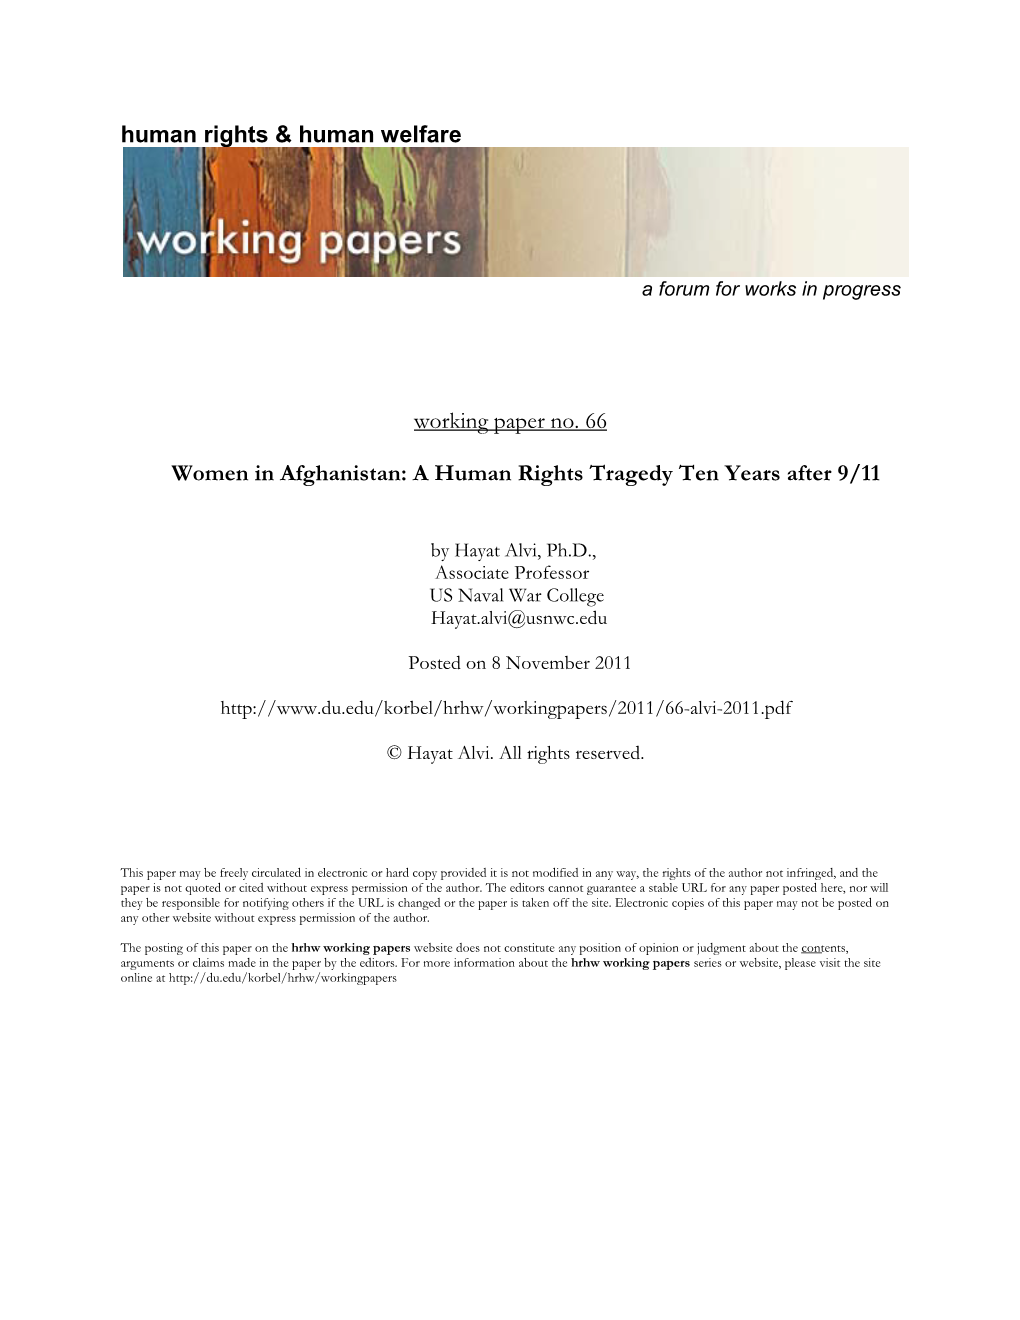 Women in Afghanistan: a Human Rights Tragedy Ten Years After 9/11